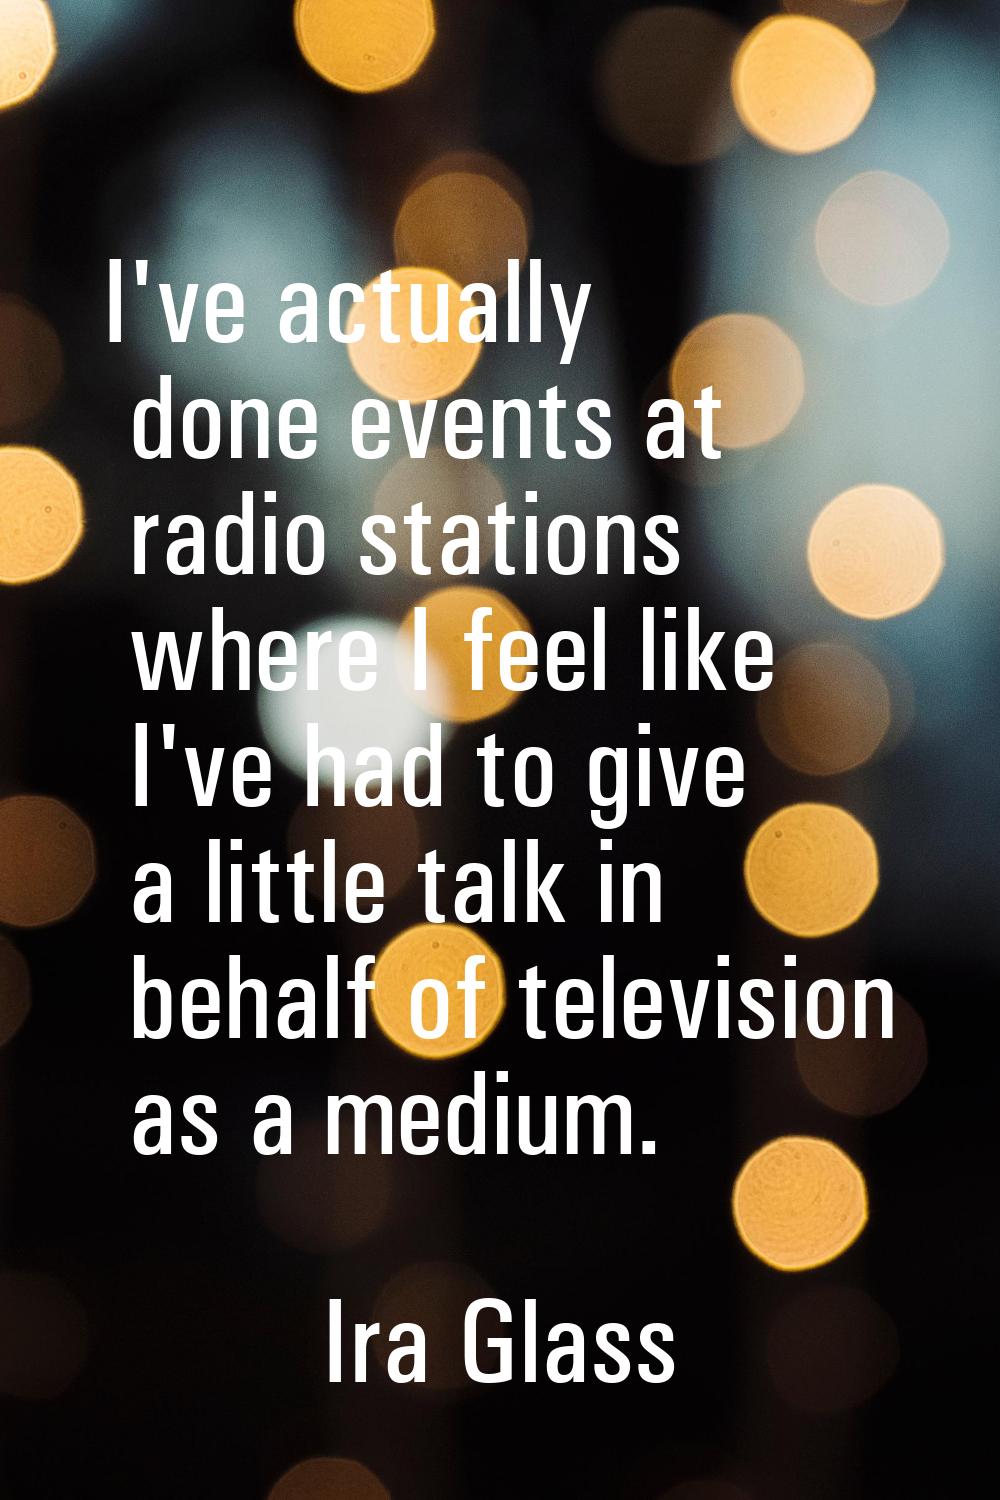 I've actually done events at radio stations where I feel like I've had to give a little talk in beh